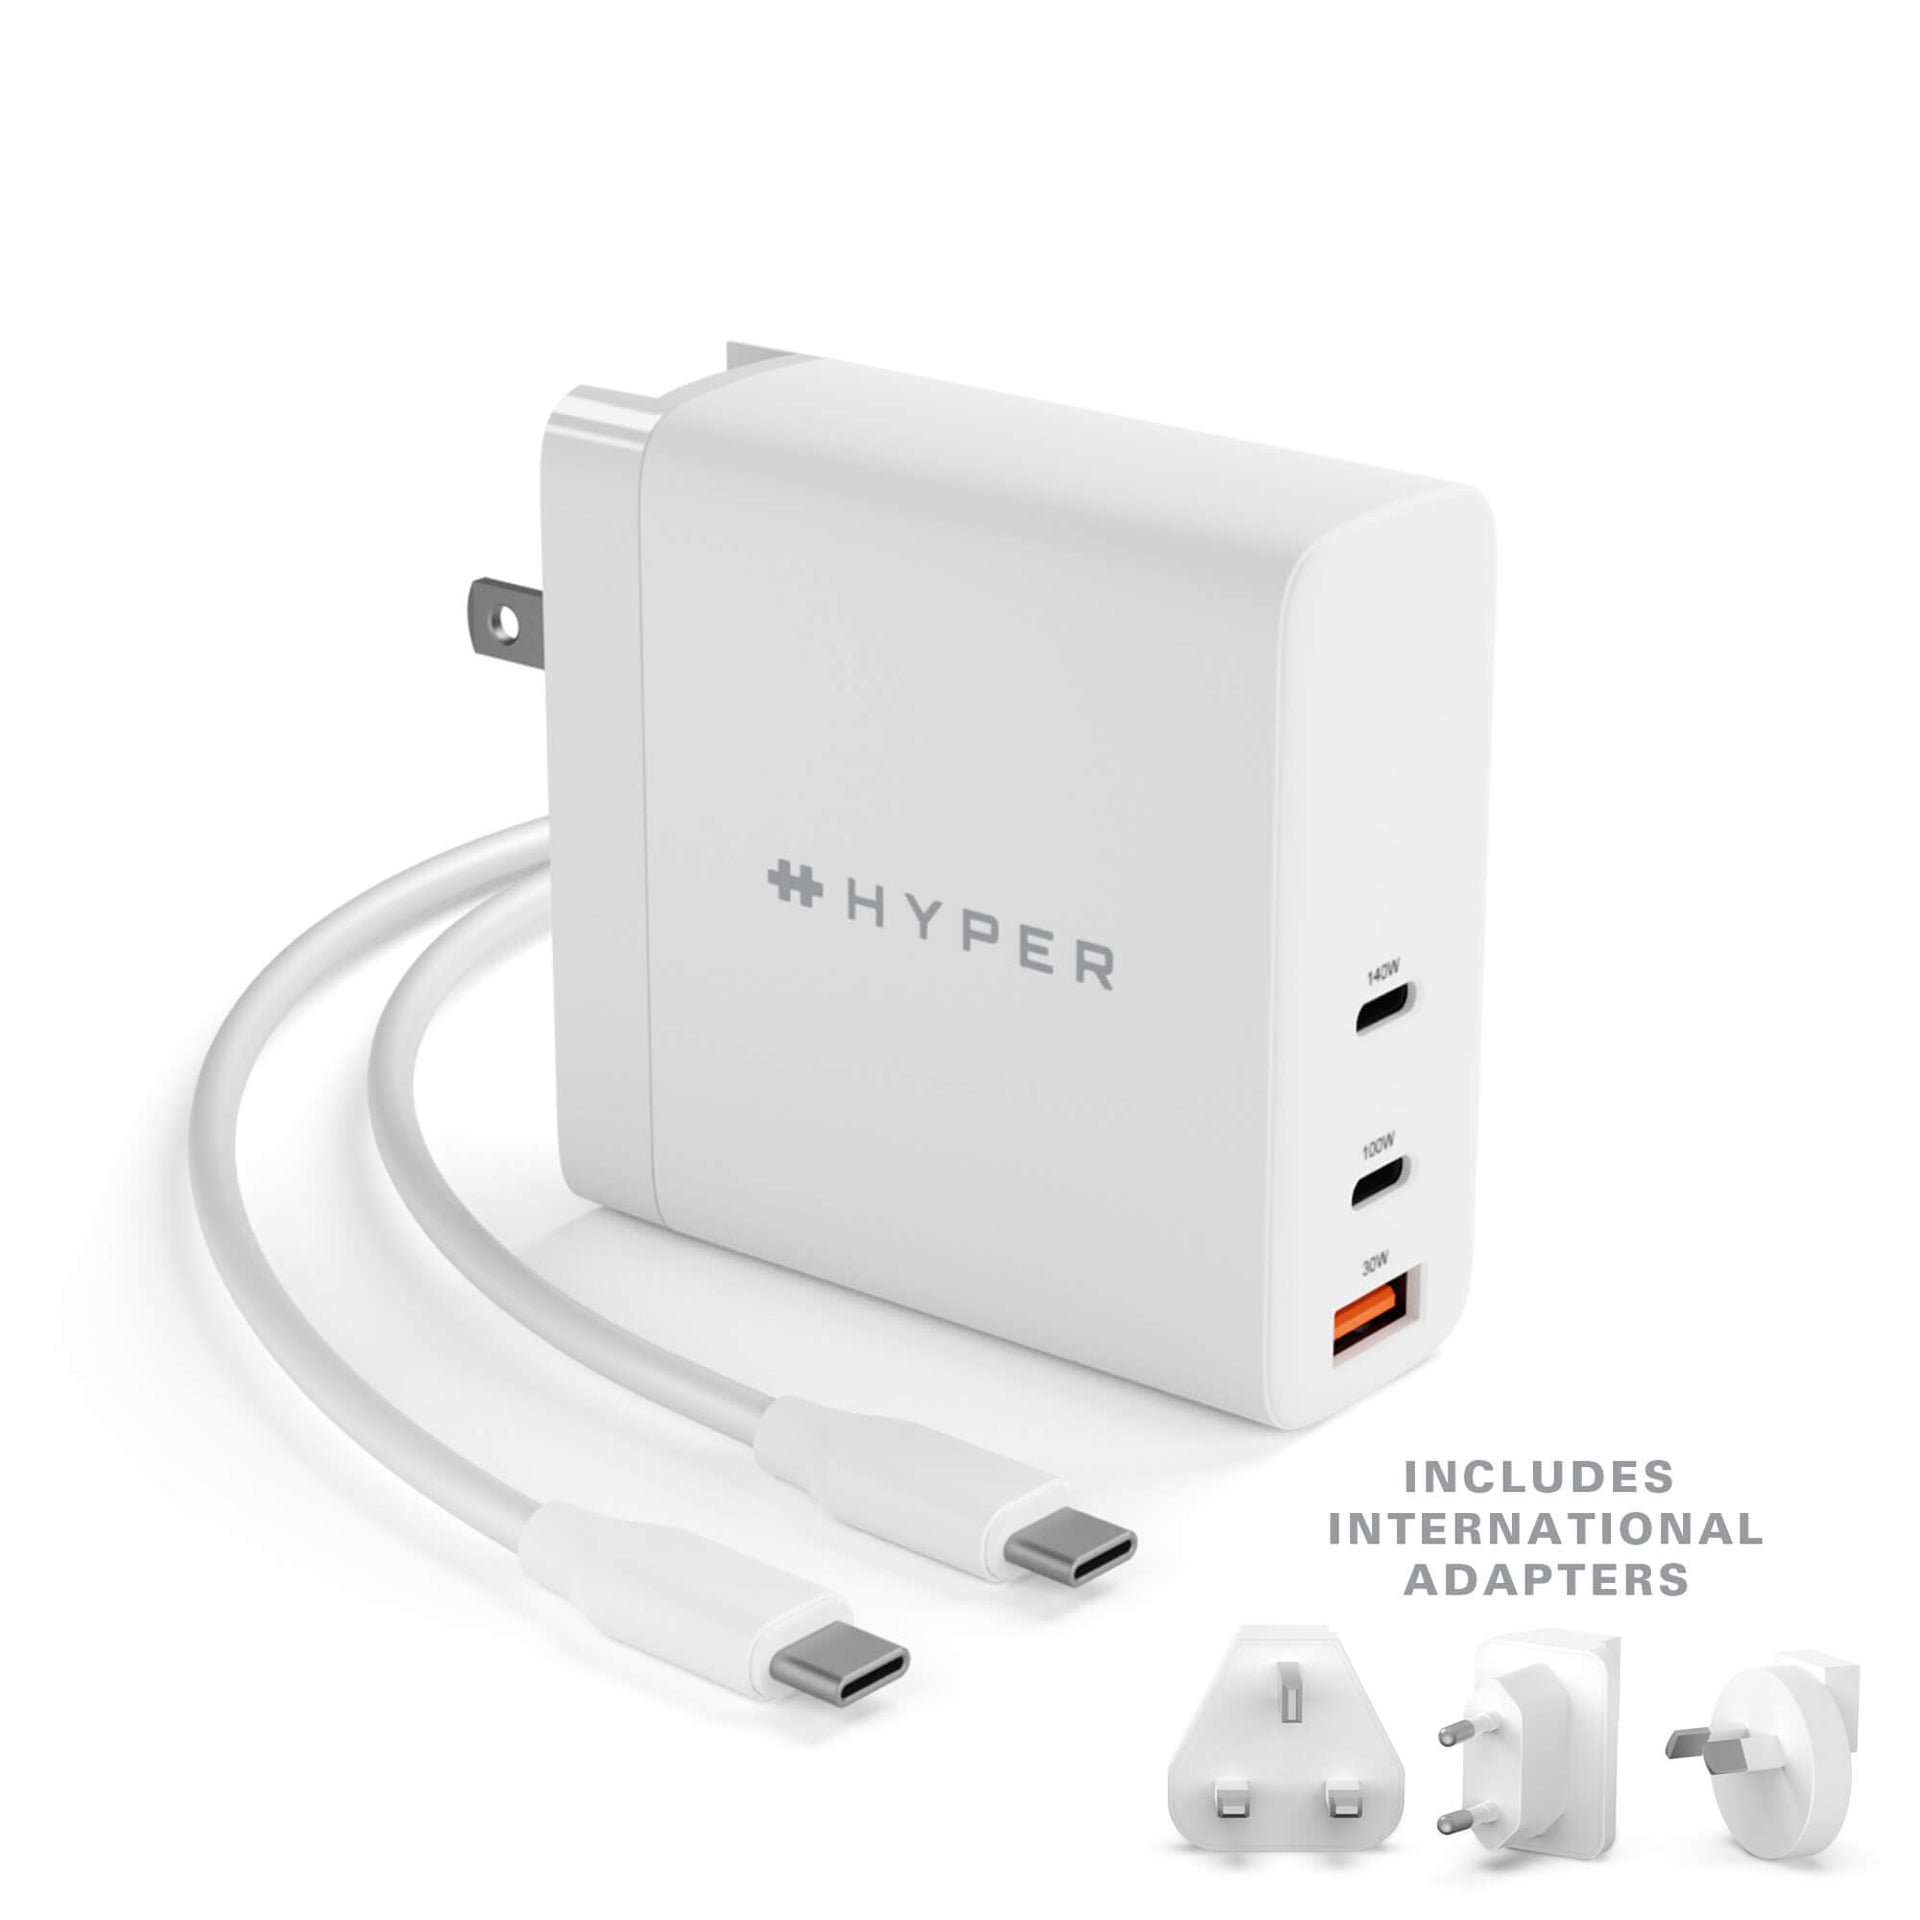 HyperJuice 140W GaN Wall USB-C Charger with Adapters